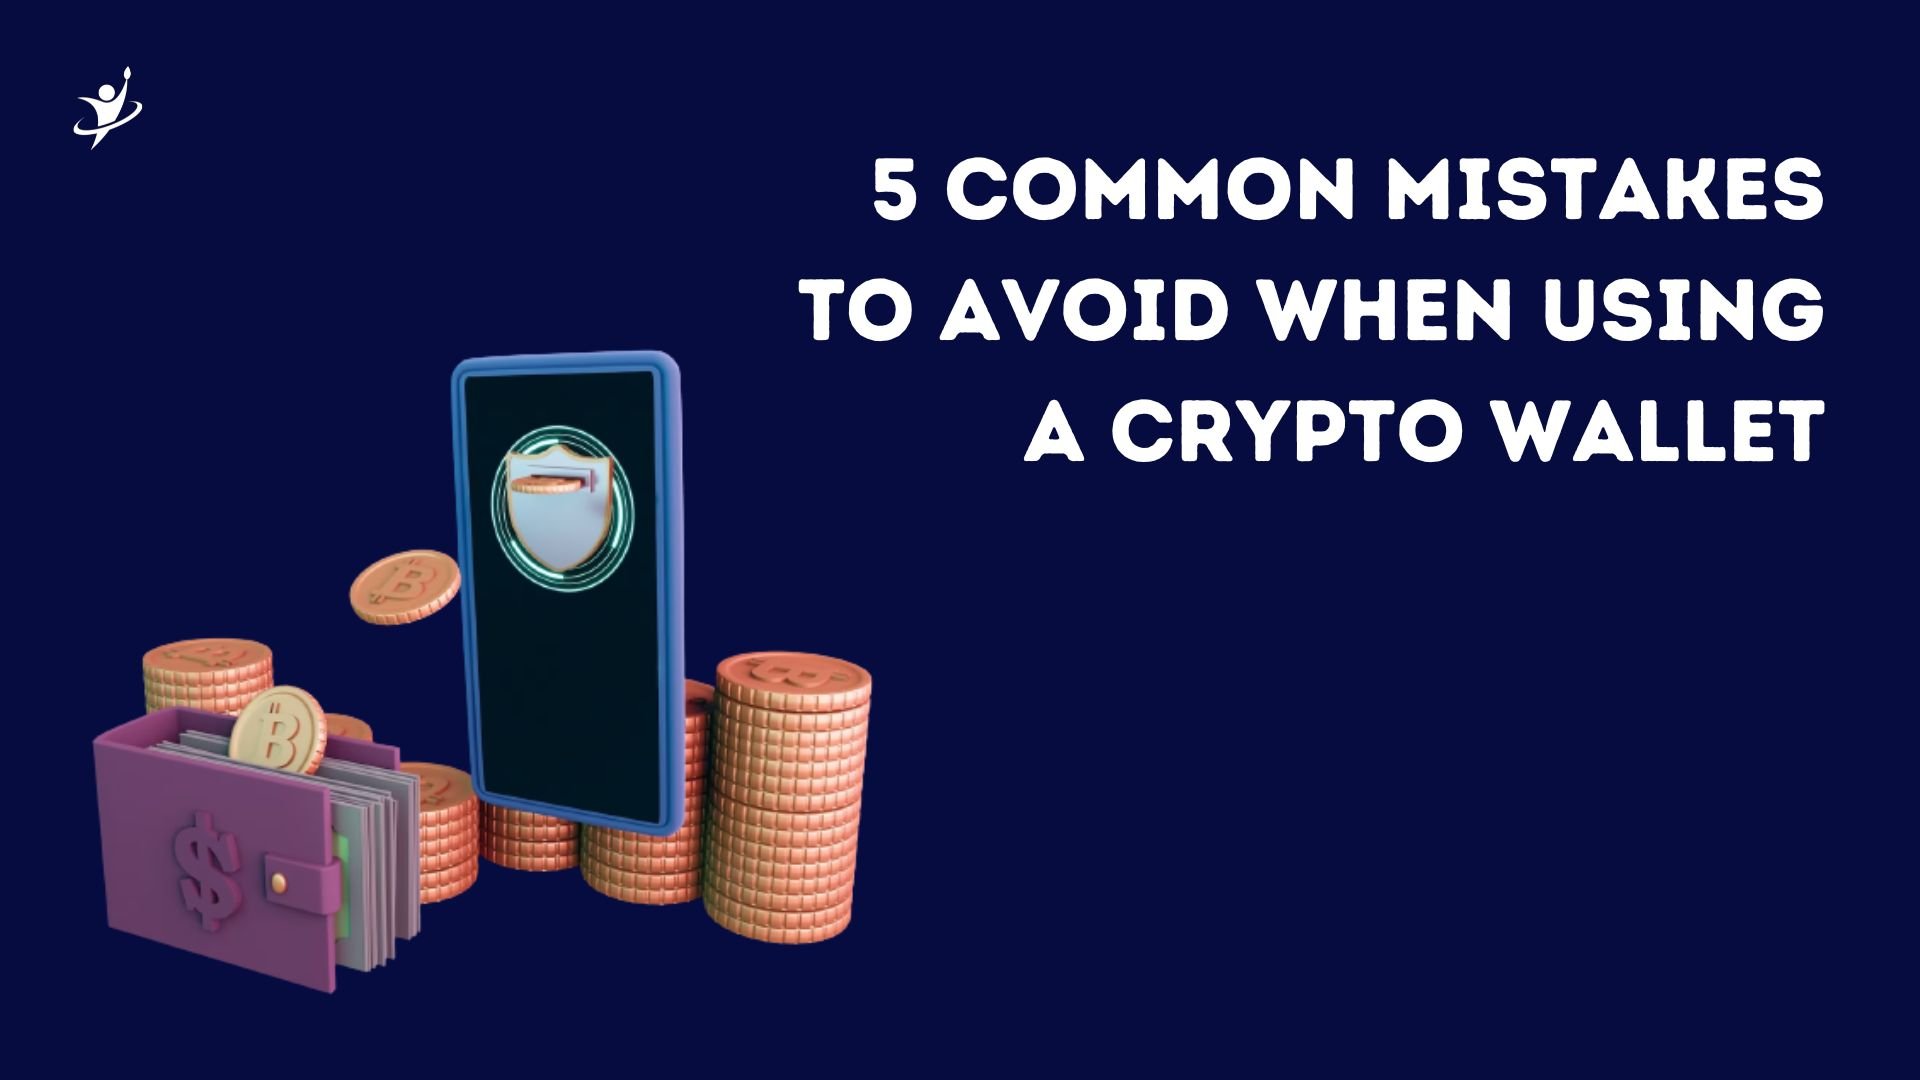 5 Common Mistakes to Avoid When Using a Crypto Wallet